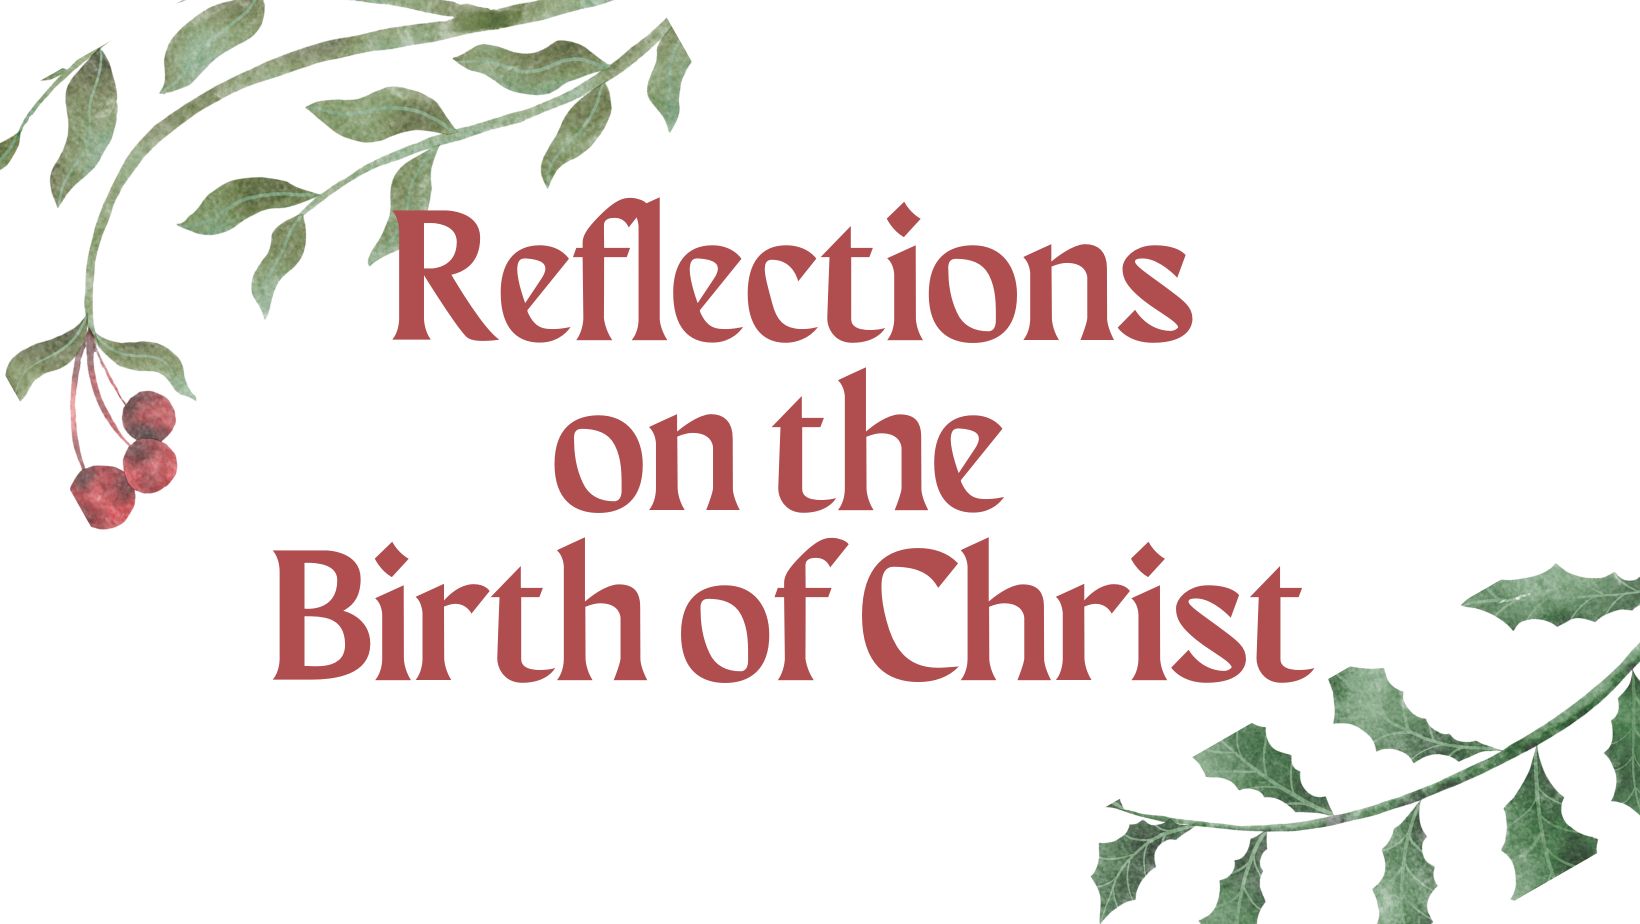 Reflections on the Birth of Christ